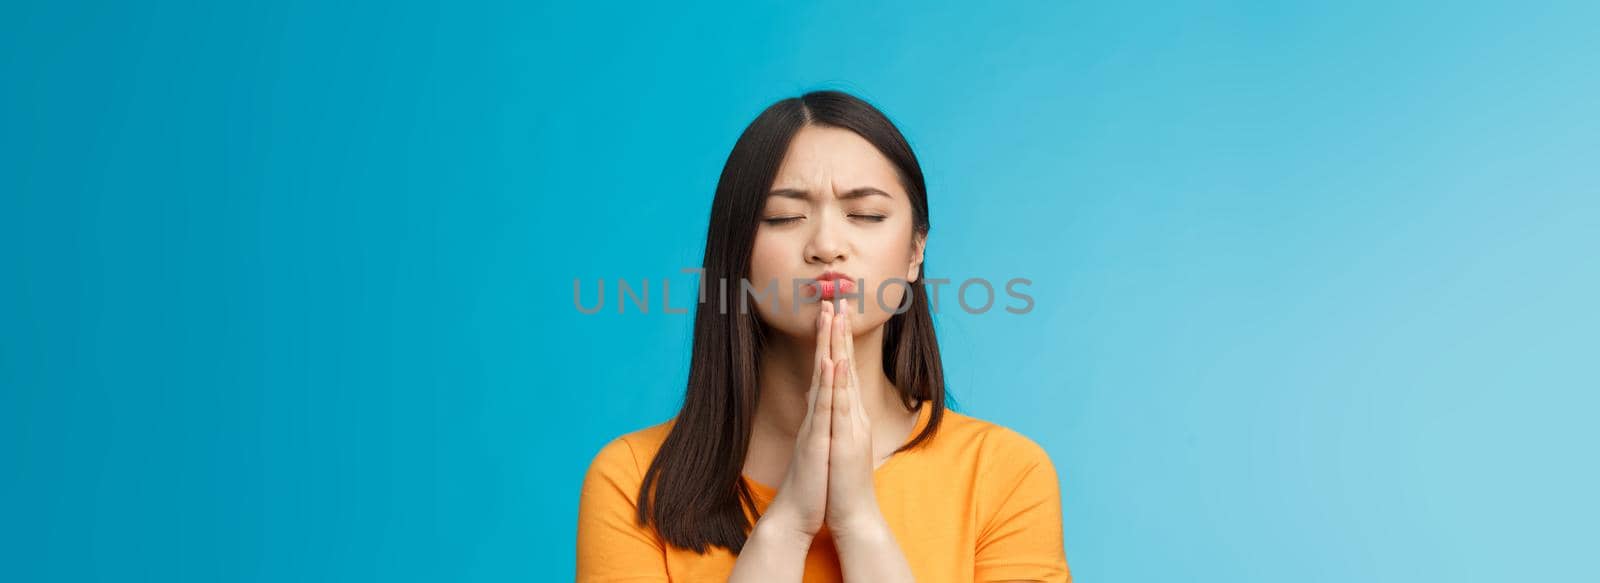 Determined motivated cute asian female praying dream come true, slap hands together pray pose, close eyes pouting eager win, achieve positive reply from university, stand blue background hopeful by Benzoix